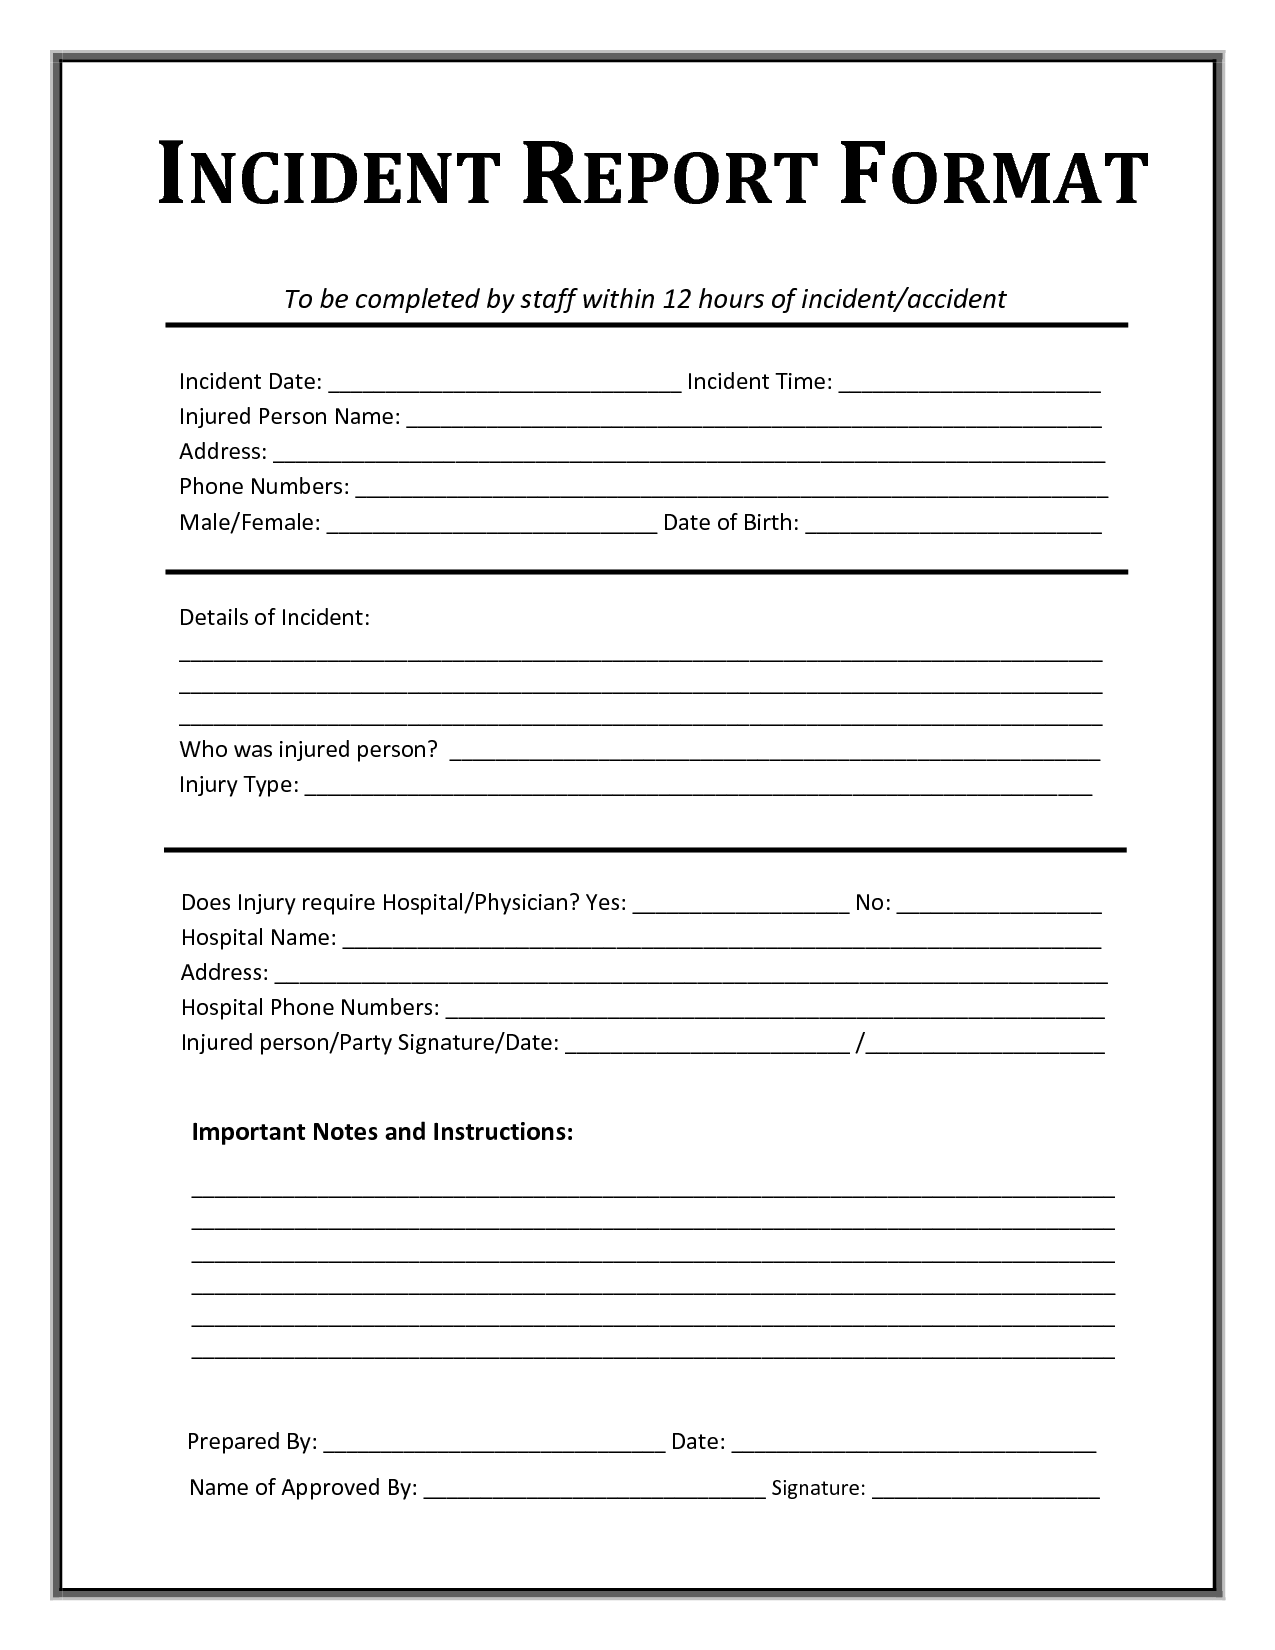 accident report form template   Tier.brianhenry.co